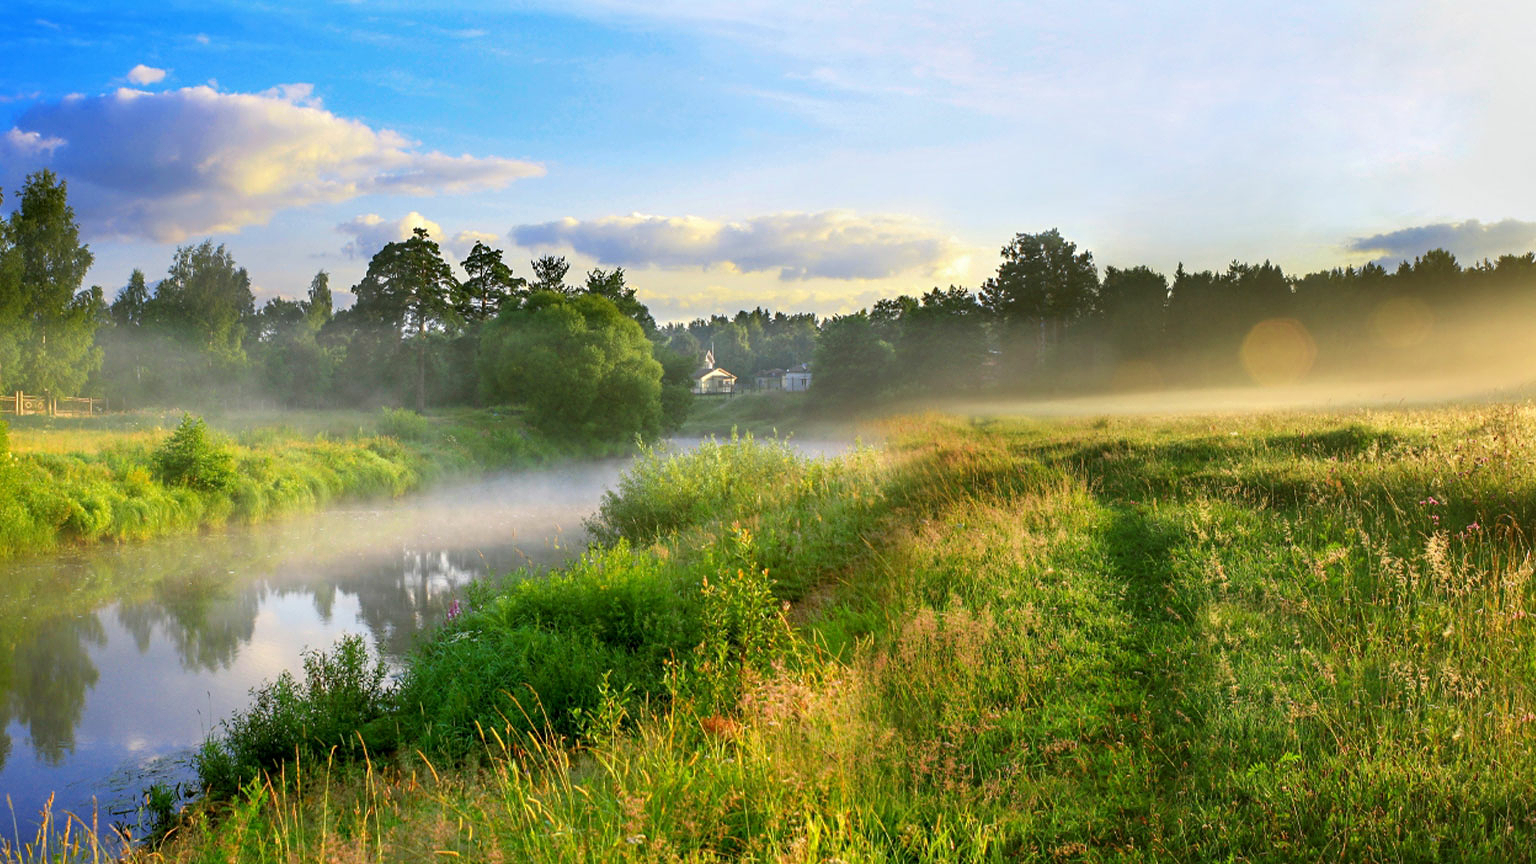 Grassland at dawn with a small river and the sun